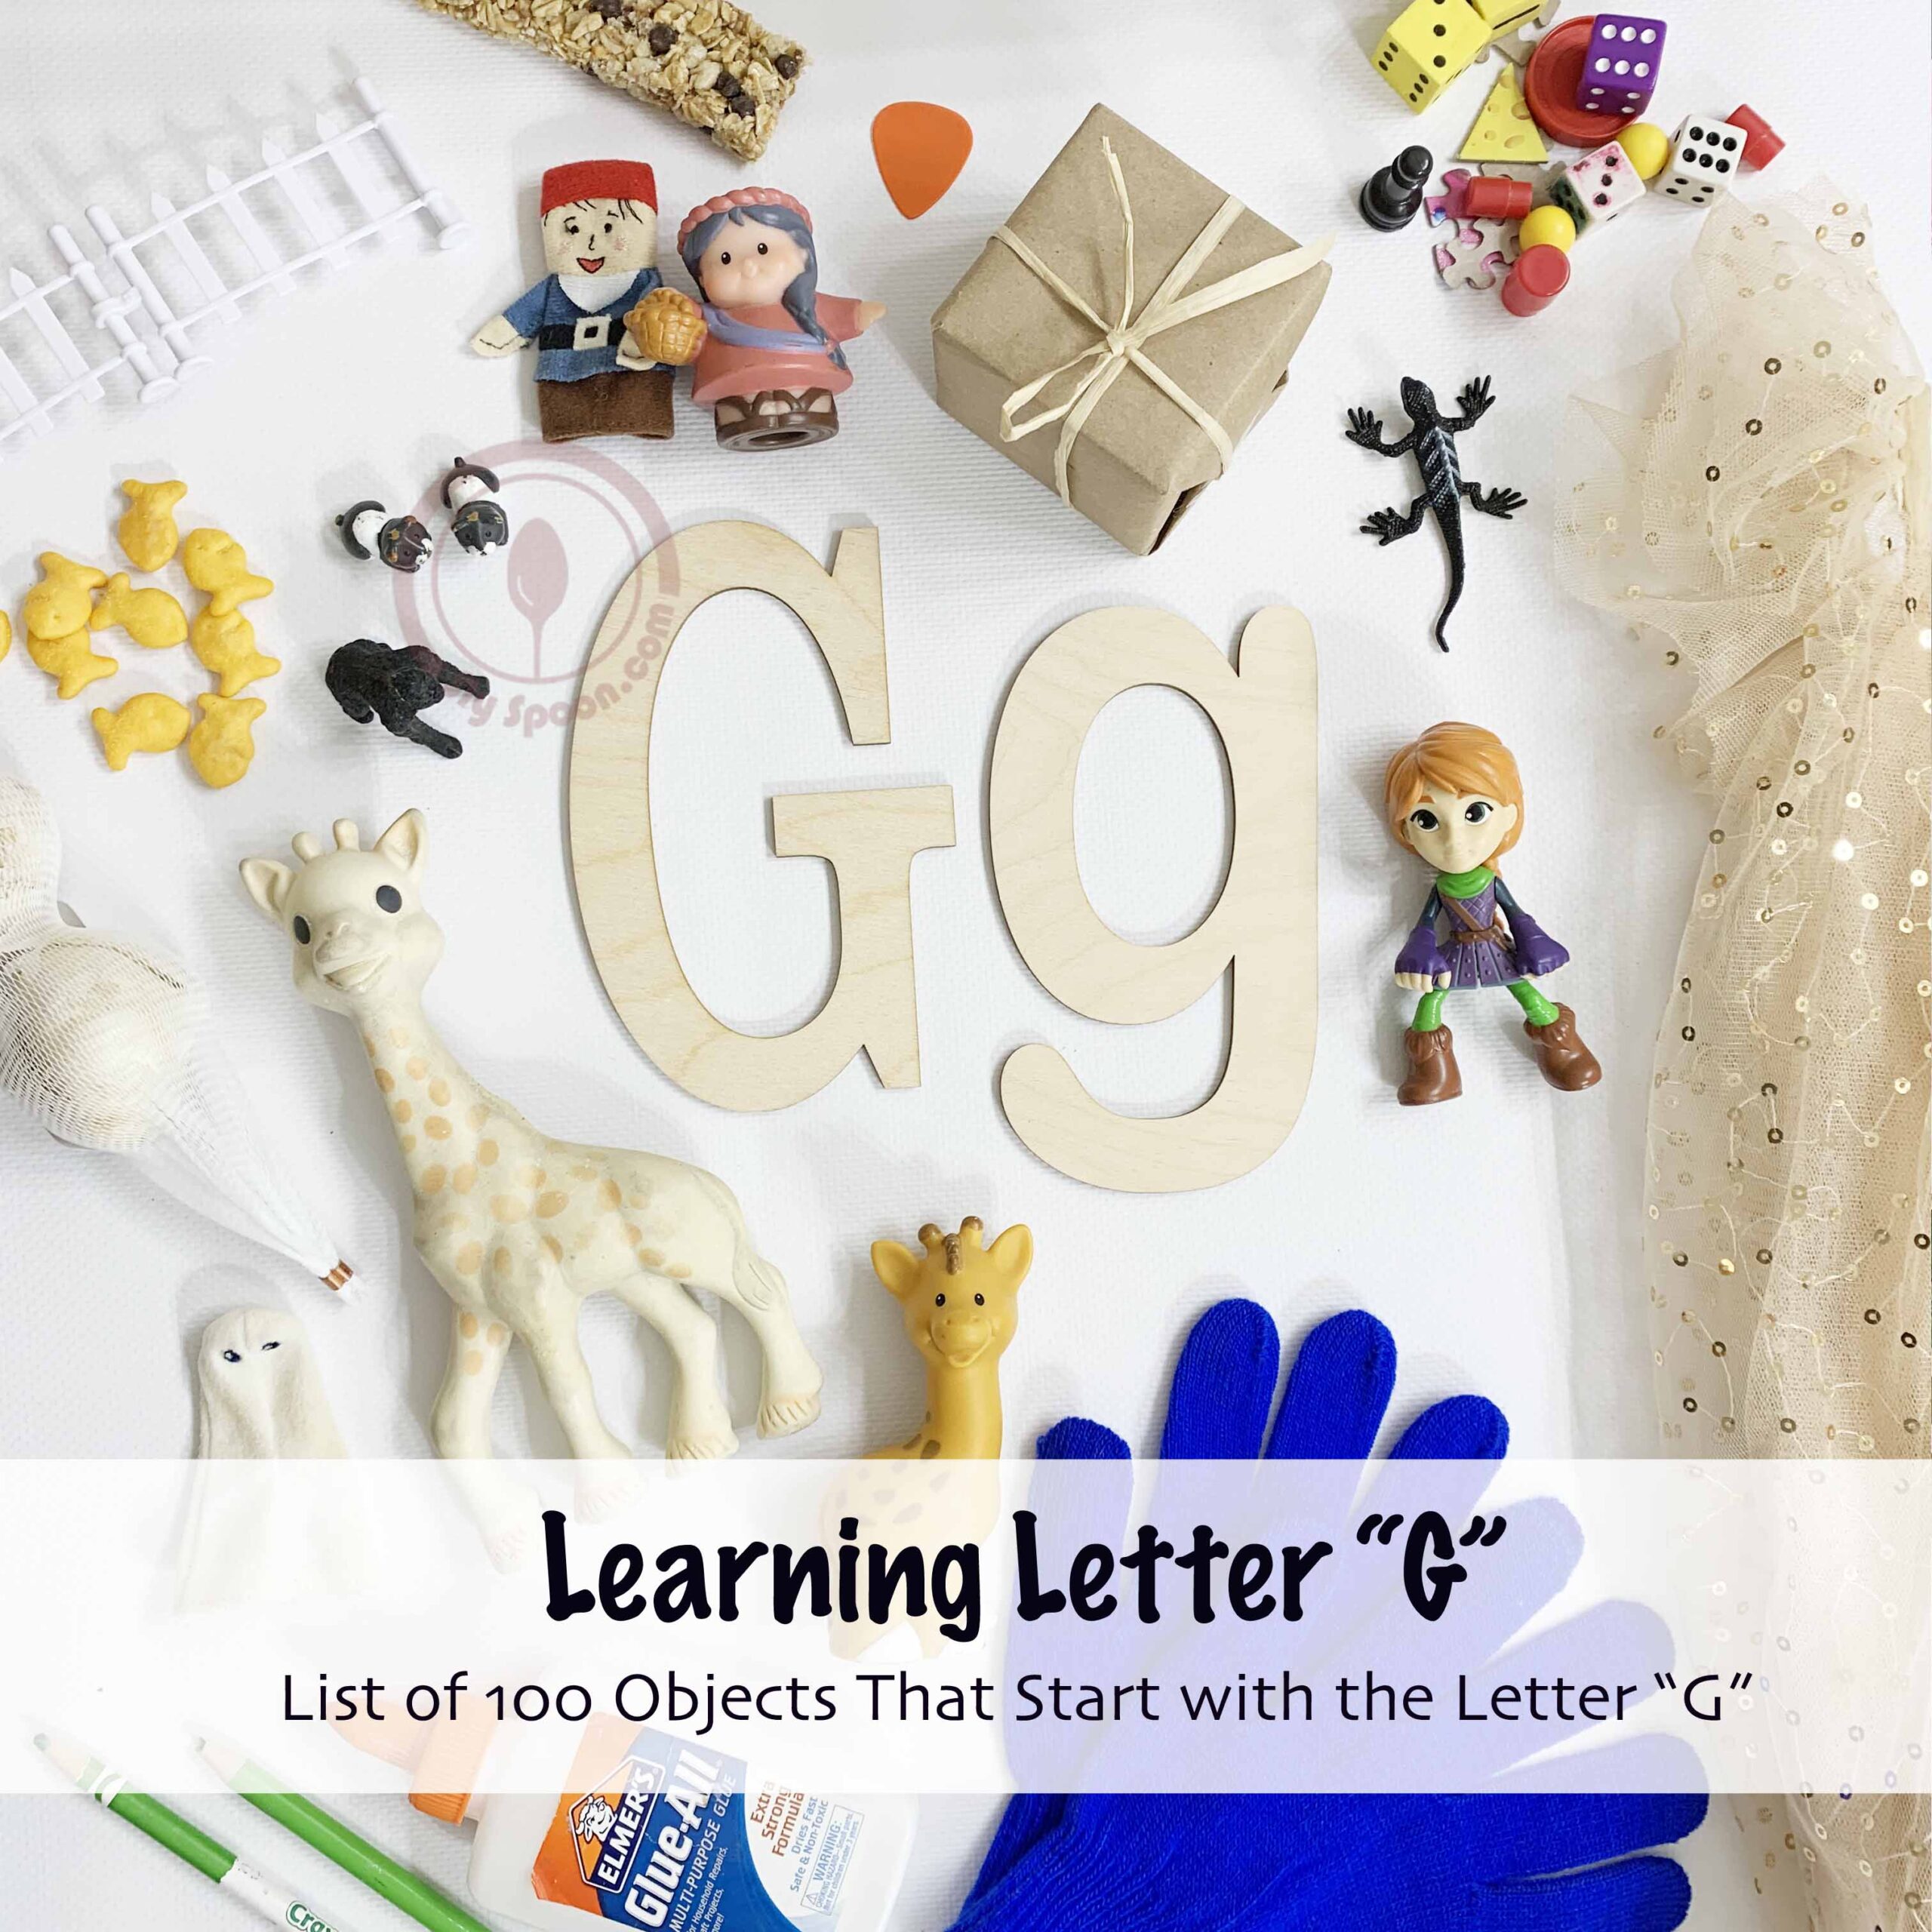 Big List of Object and Things that start with Letter G